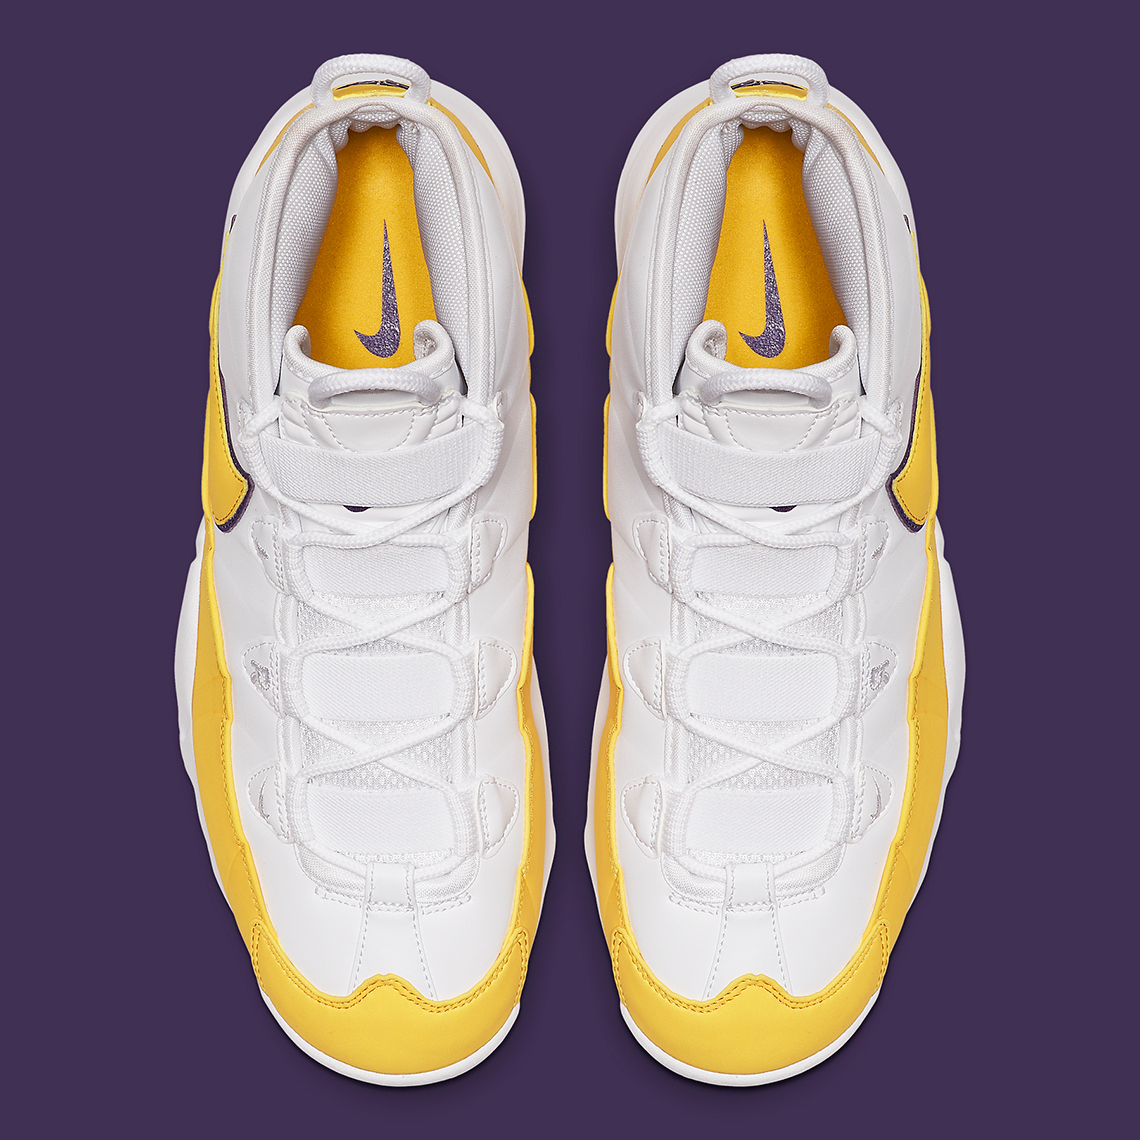 uptempo lakers